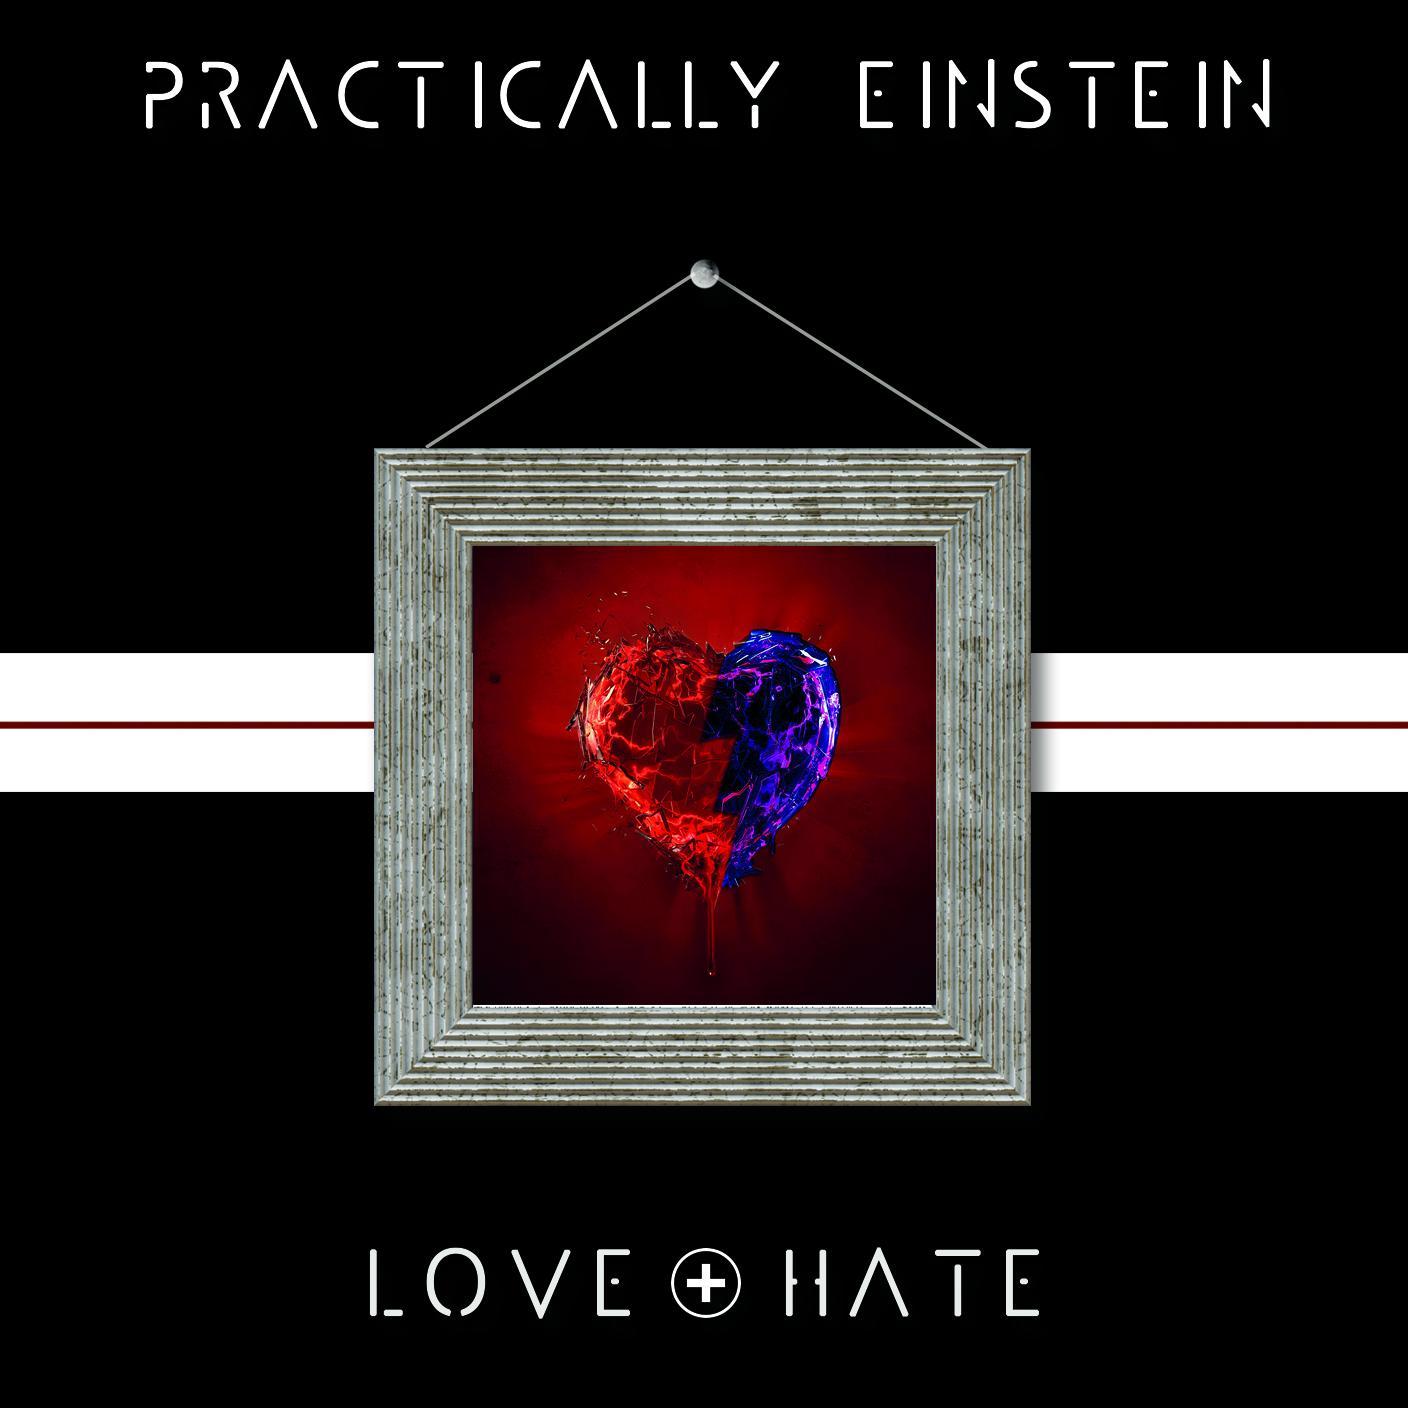 Modern vintage rock with a heavy dose of 90's and a touch of soul. LOVE + HATE EP here! http://t.co/7NjOVcfWr6